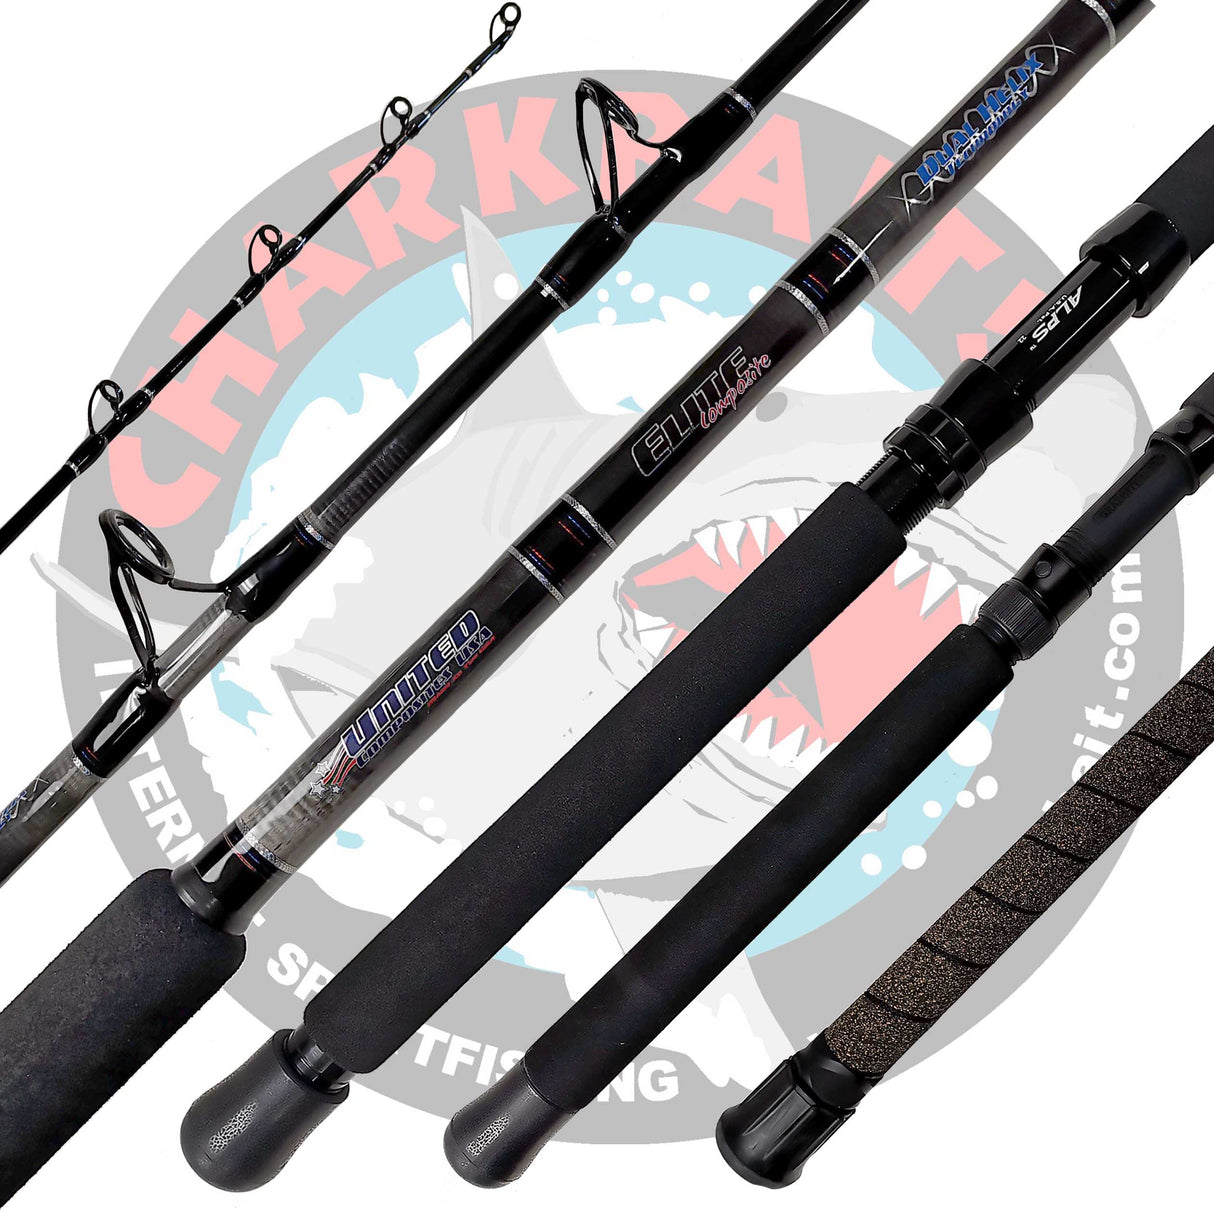 United Composites RCE 800 8ft Conventional Rods